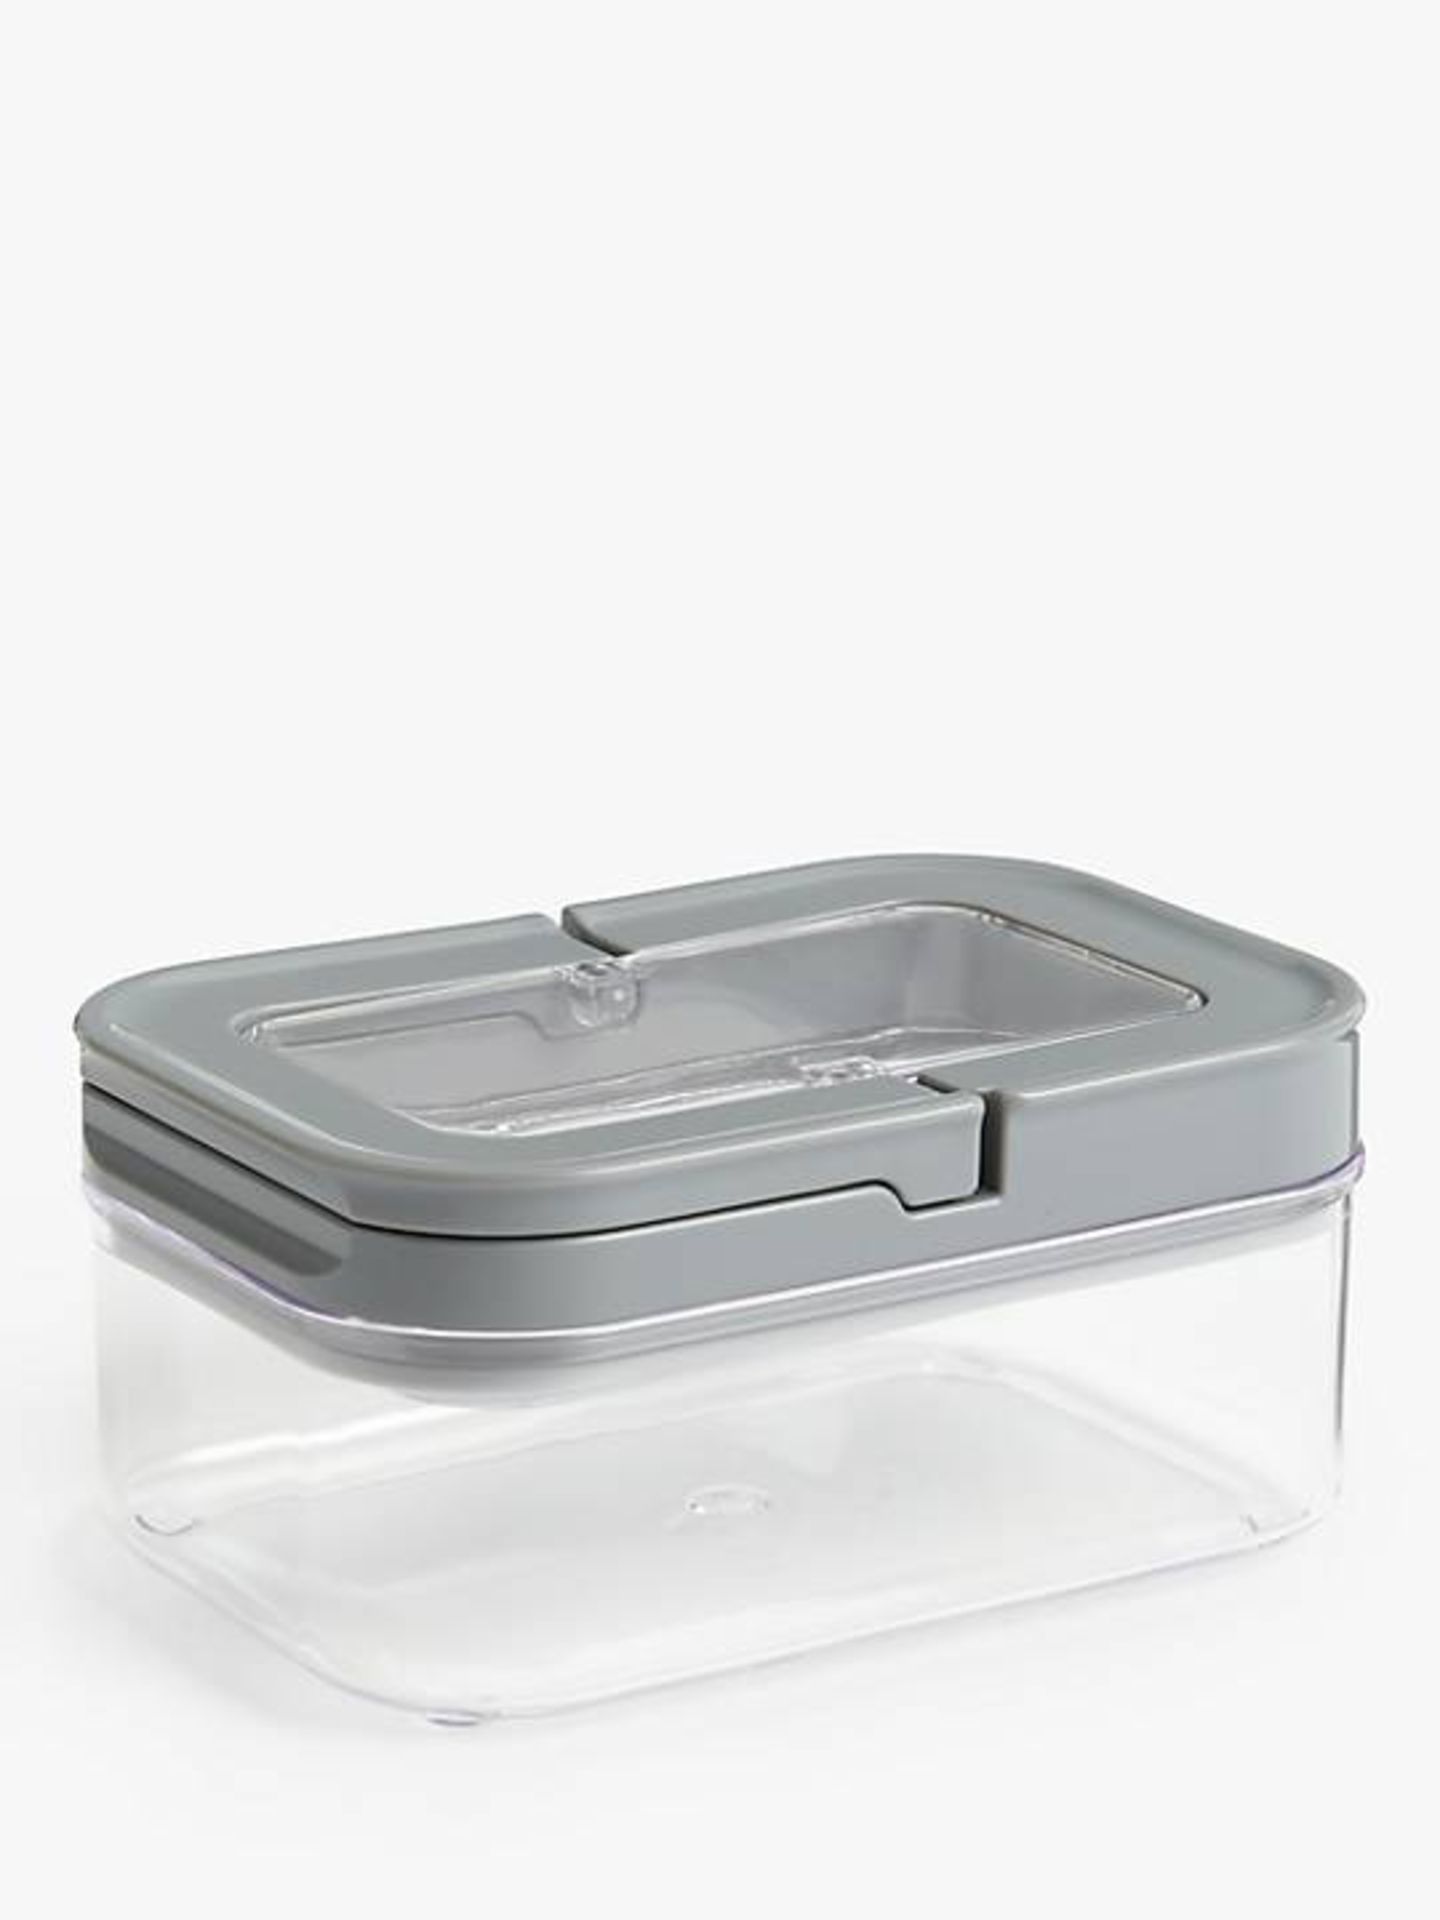 Pallet of Raw Customer Returns - Category - OWNBRAND KITCHENWARE - P20000038 - Image 98 of 111